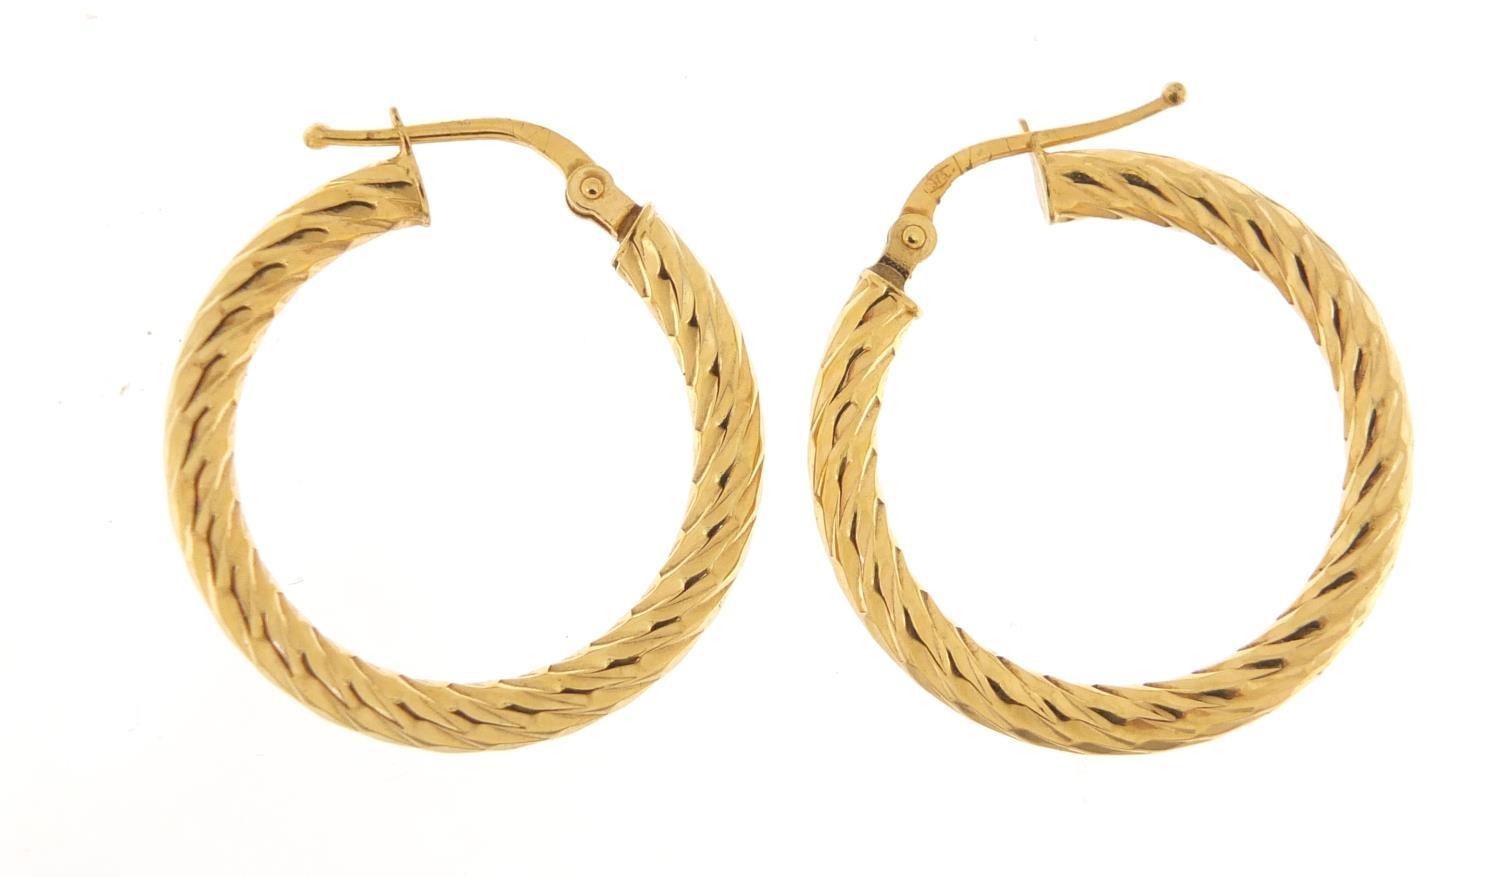 Pair of 9ct gold hoop earrings, 2.5cm in diameter, 1.8g : For Further Condition Reports Please Visit